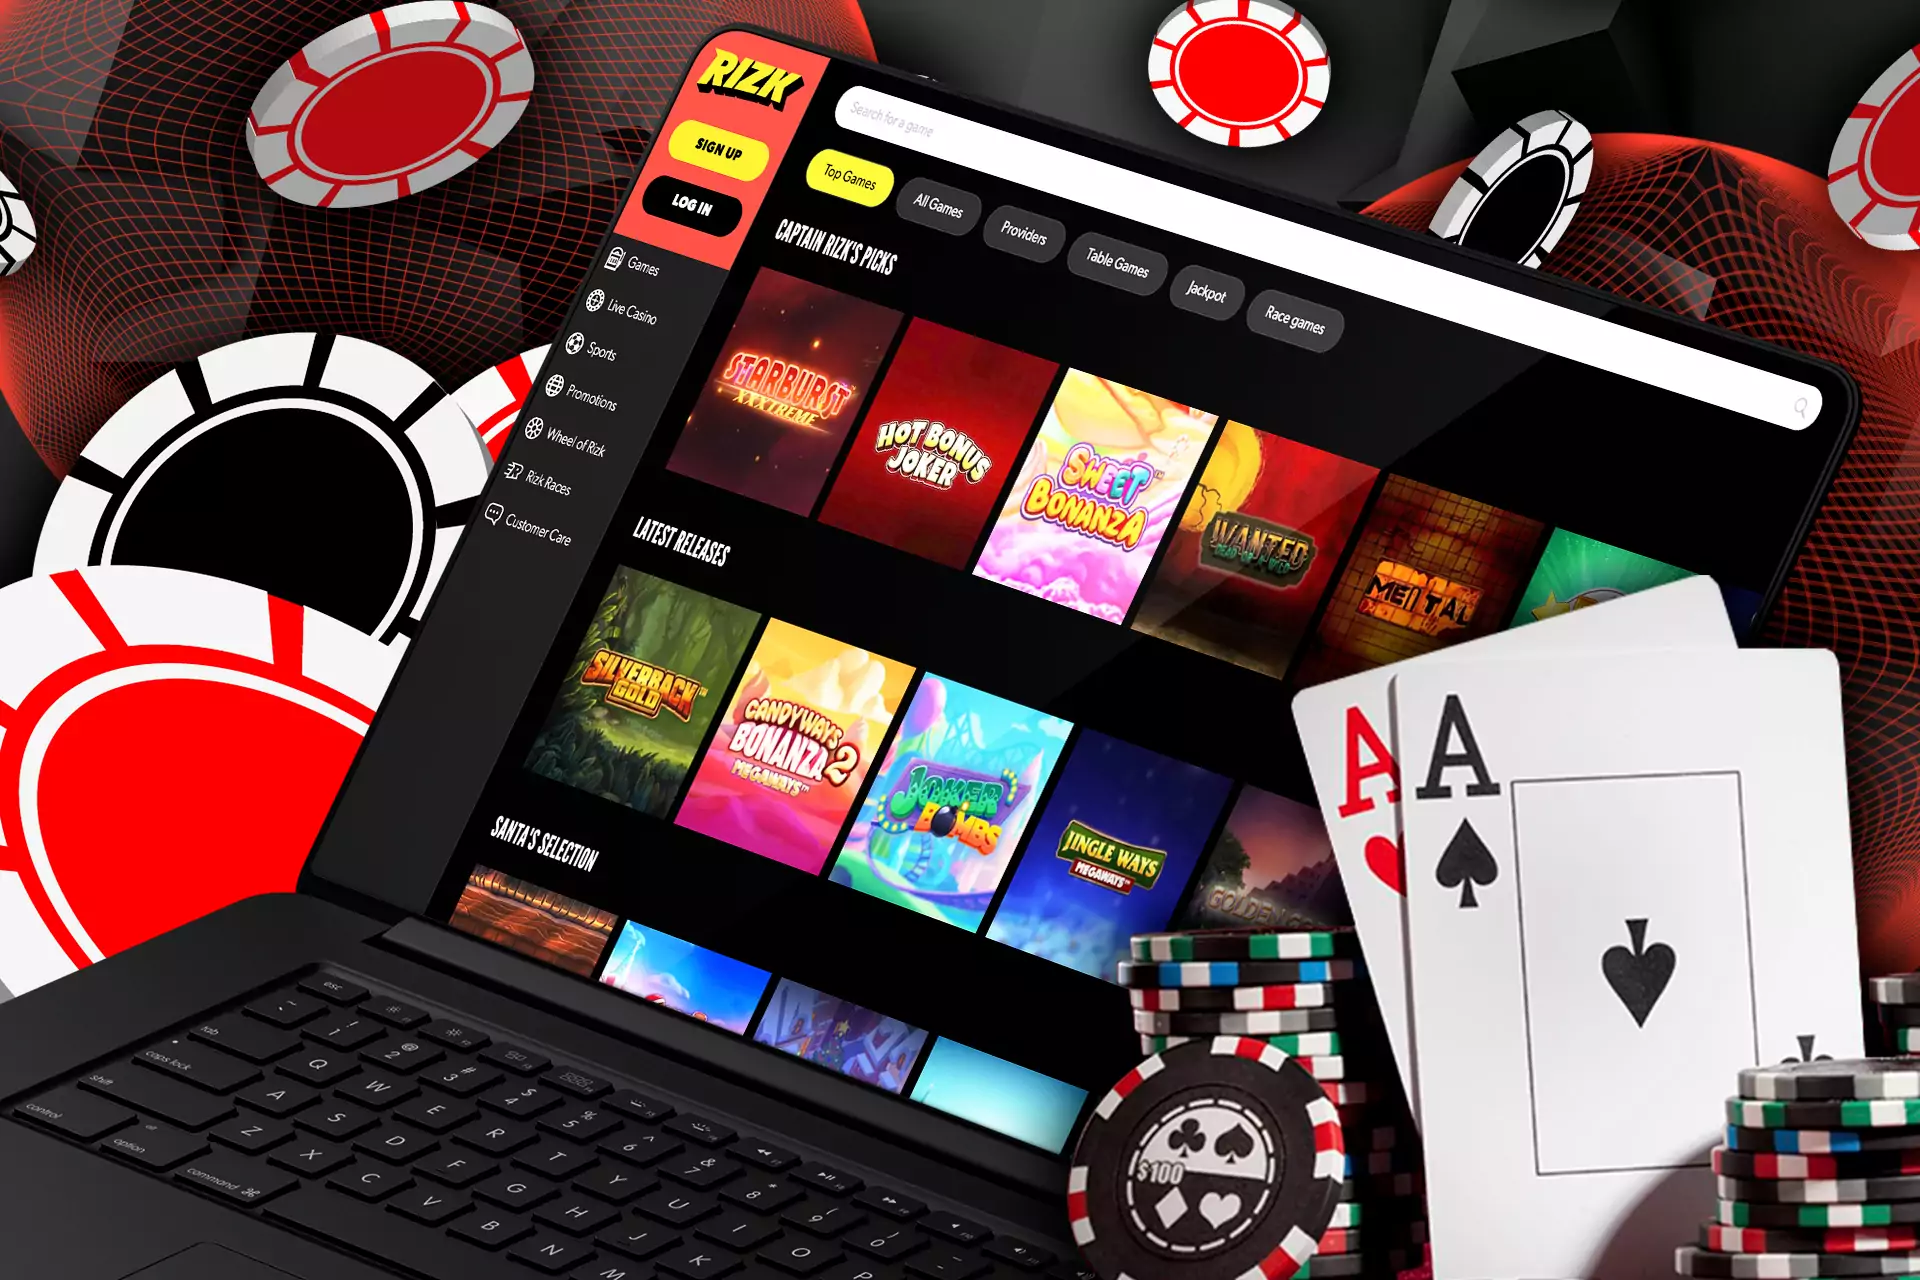 In the Rizk Casino, you can play slots and table games, wheel of Rizk and card games with real dealers.